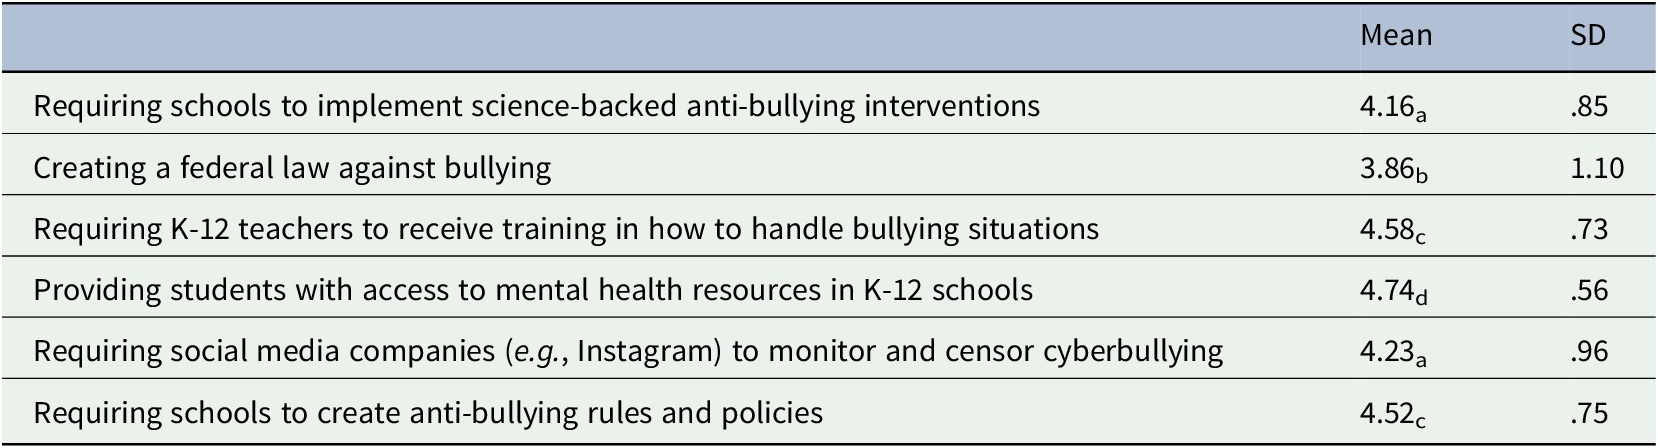 hypothesis on bullying